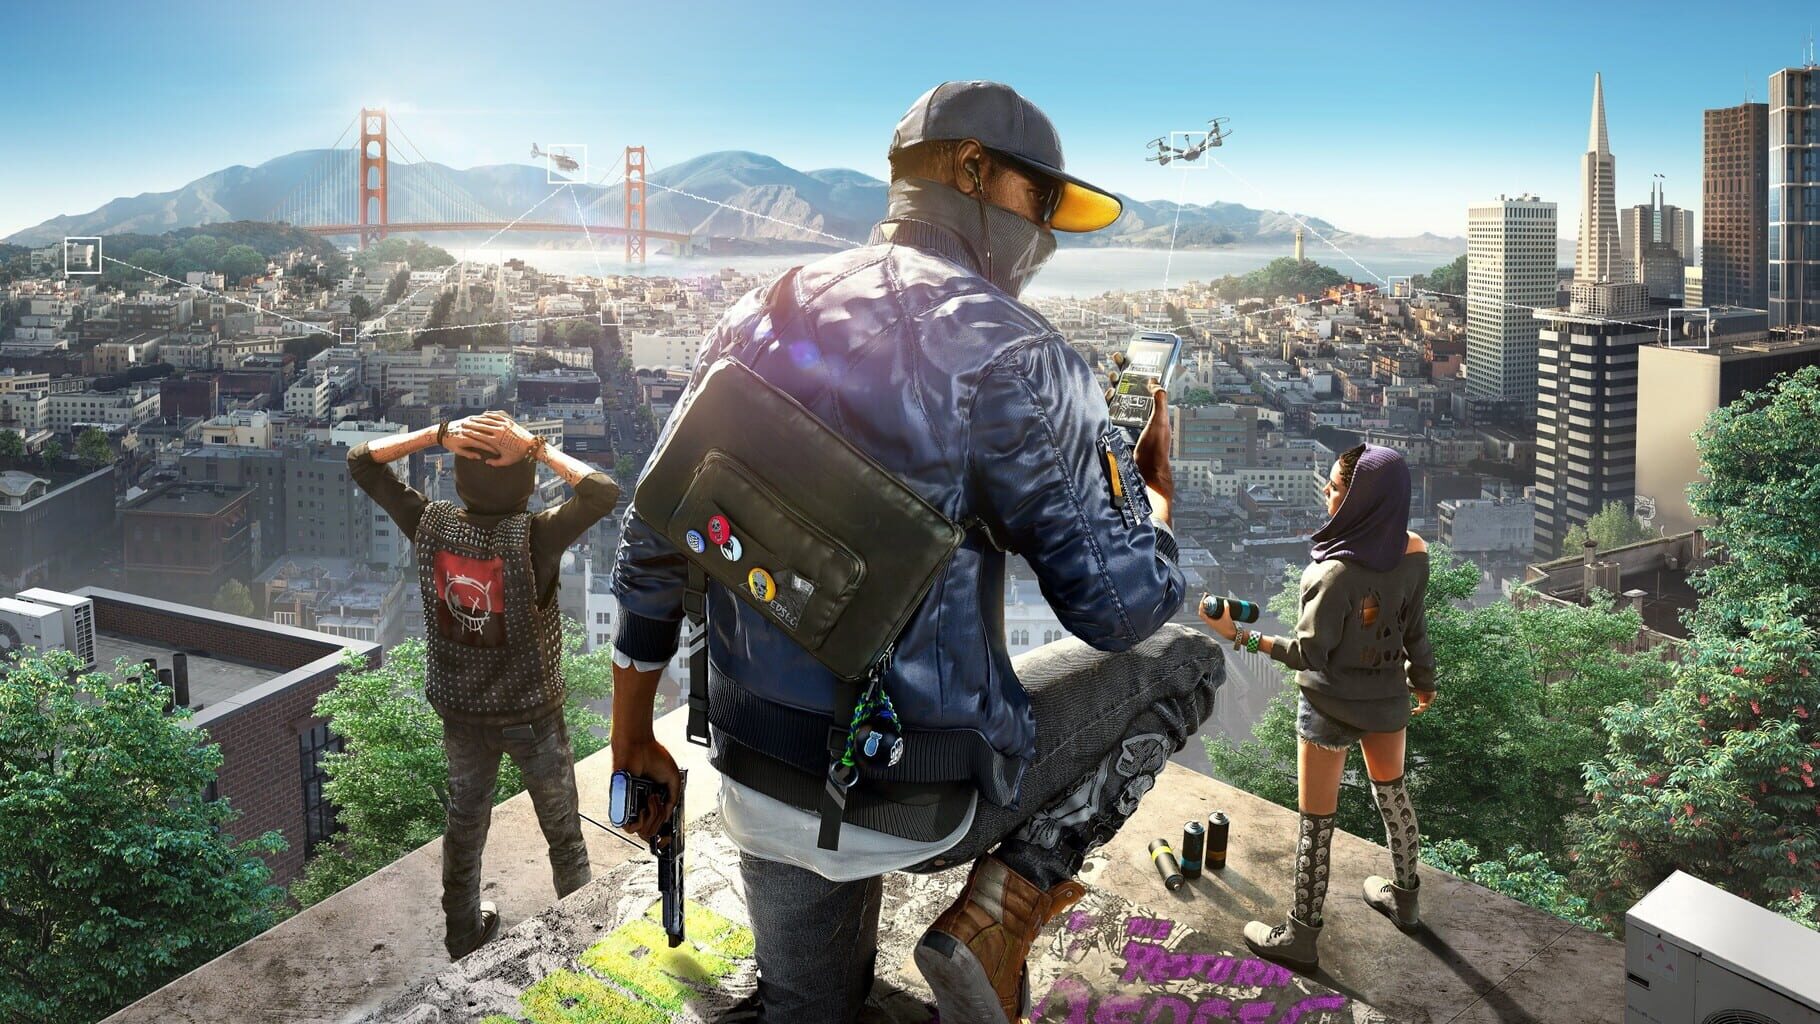 Watch Dogs 2 Image